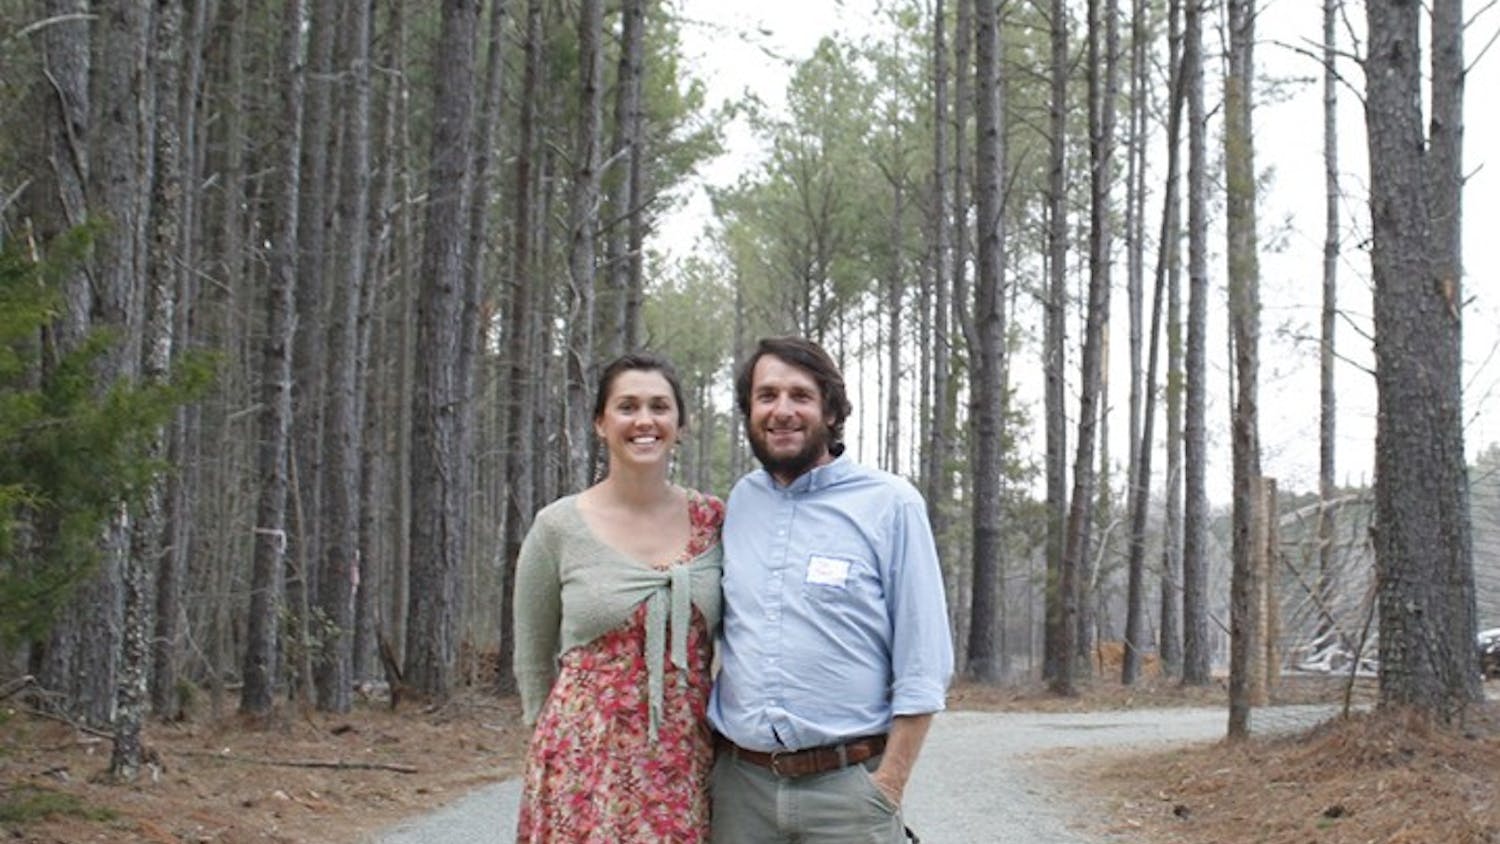 Tim & Megan Toben at The Honeysuckle Tea House outside of Carrboro in Chapel Hill, on Saturday March 22nd 2014. The Tea House is a collaborative project that began with a kickstarter page. It's set to open this March